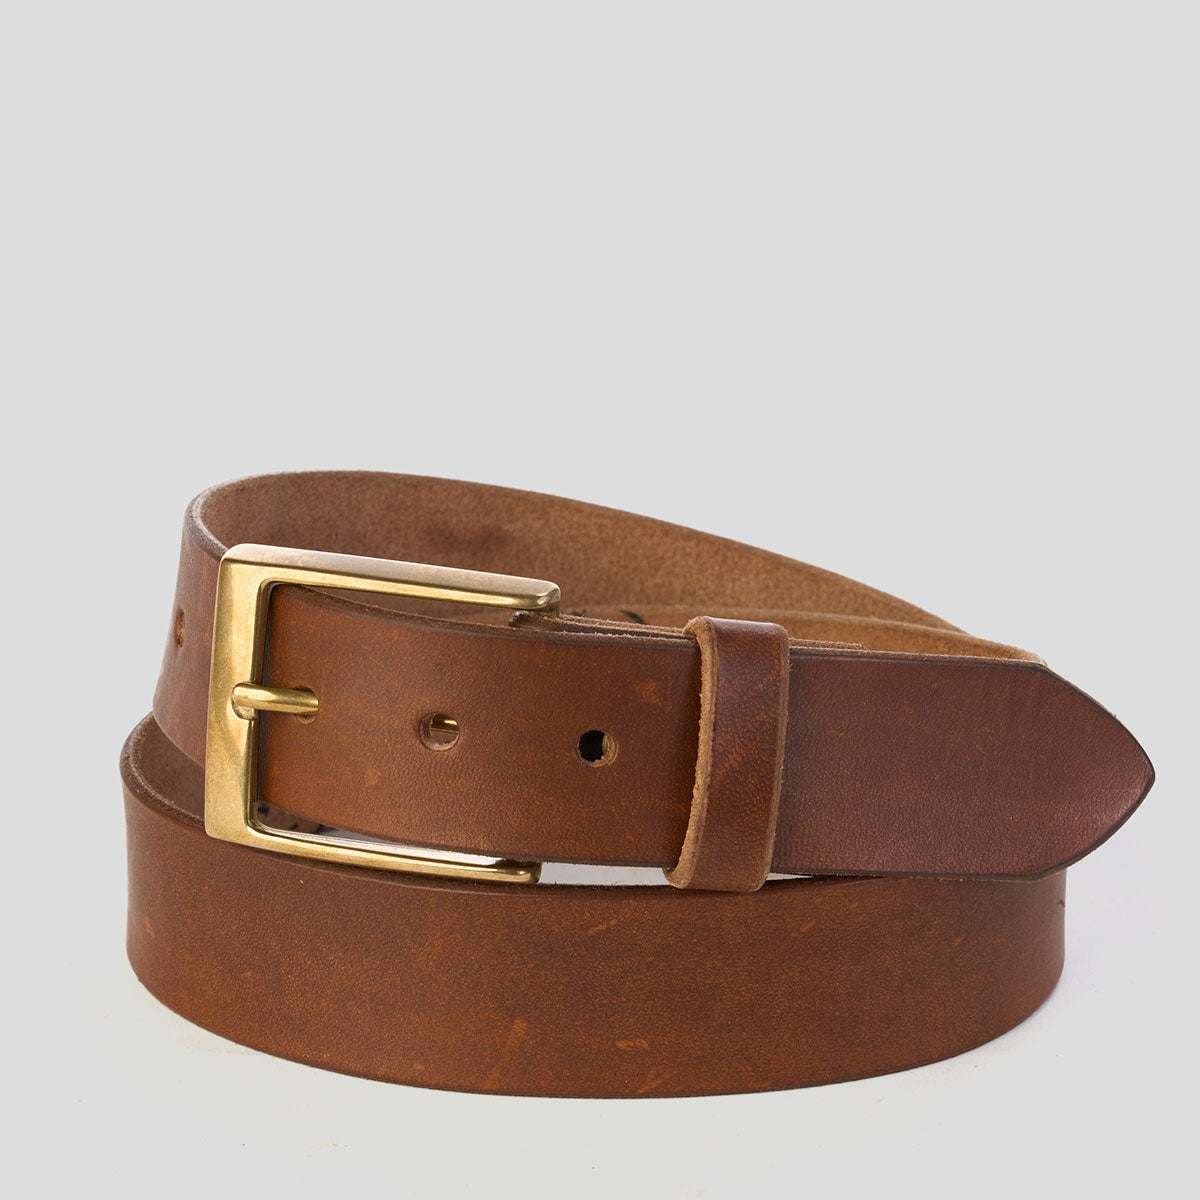 Oil Tan Extra Wide Brown Leather Belt - 46 - 48